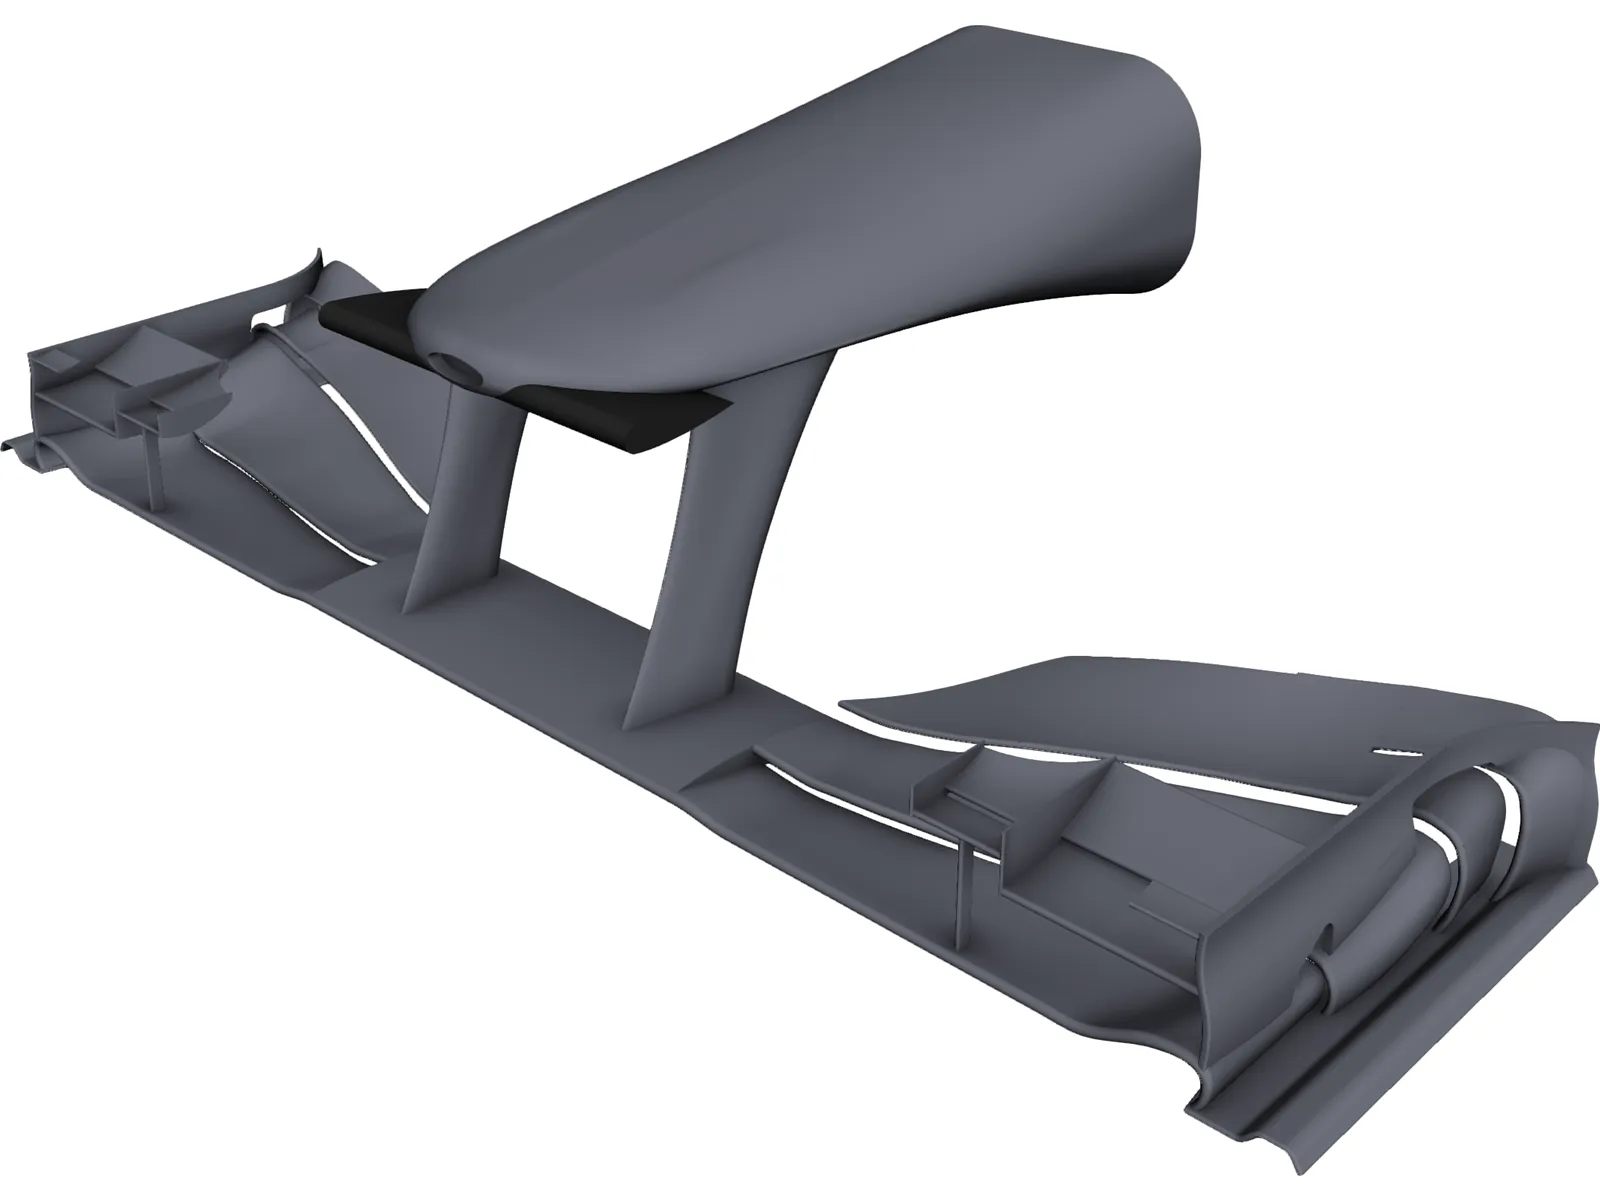 F1 Front Wing 3D Model